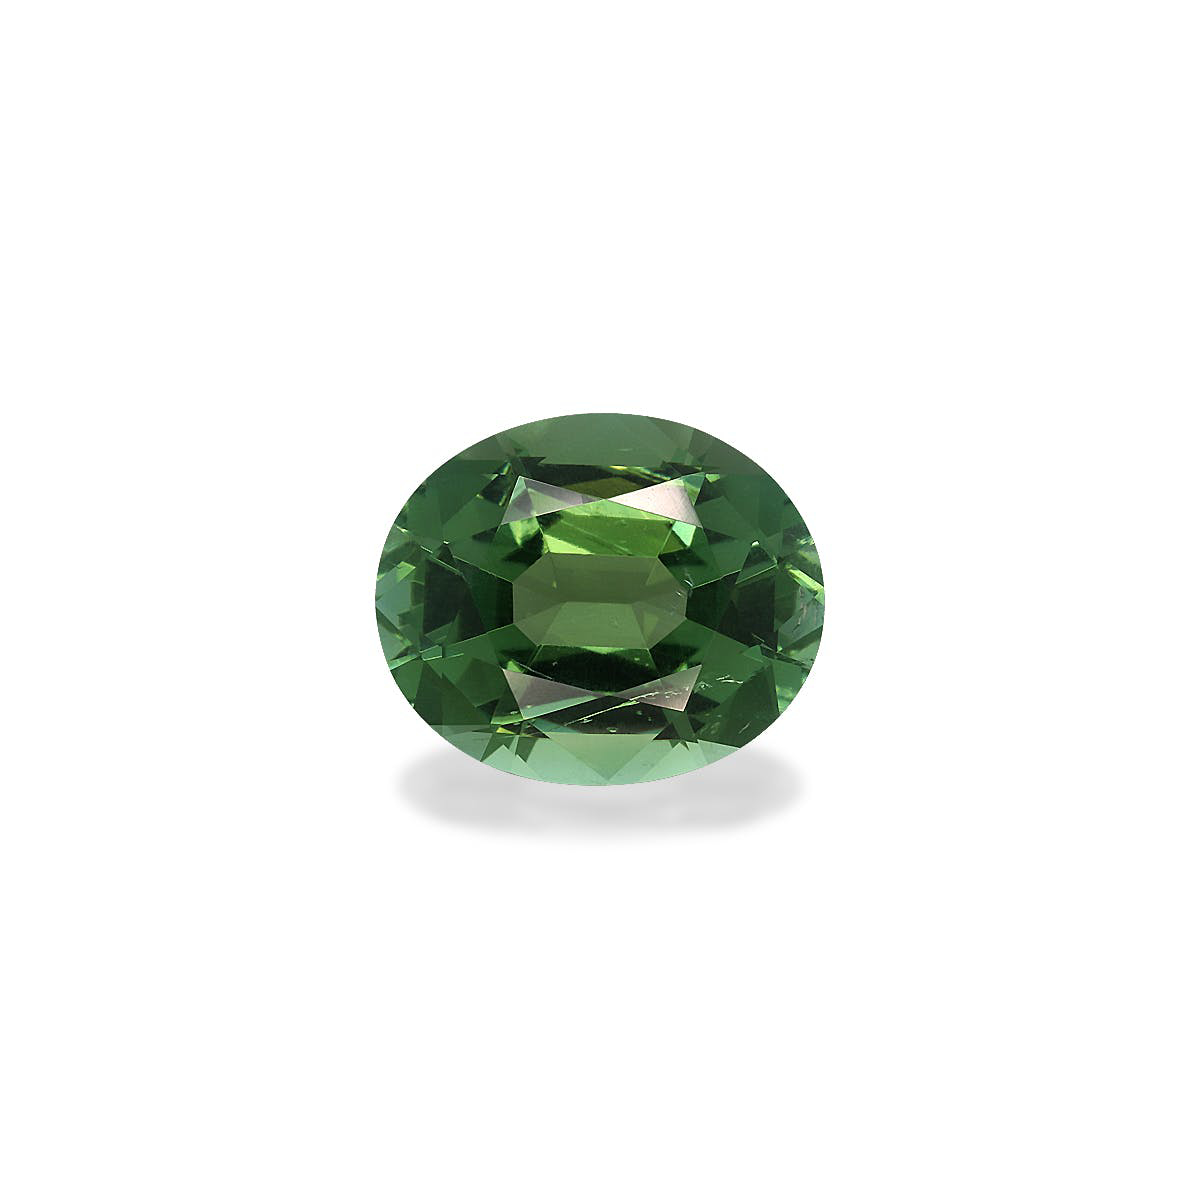 Picture of Green Tourmaline 4.98ct - 12x10mm (TG1418)